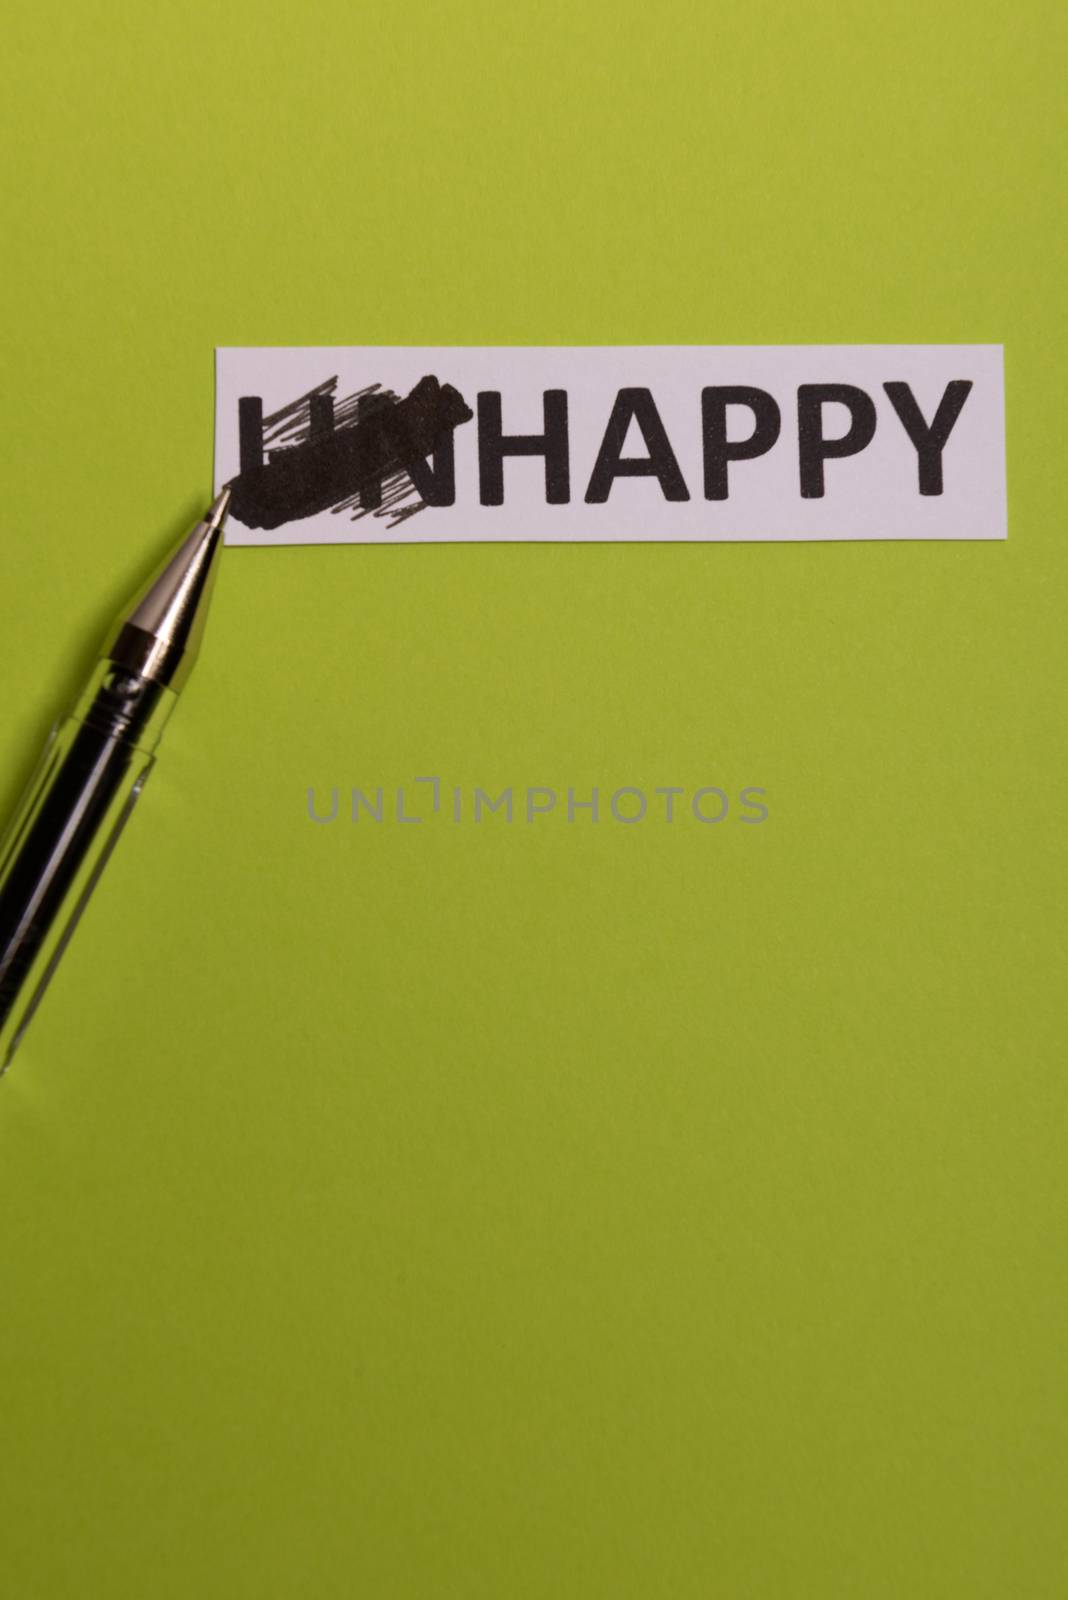 card with text unhappy, cutting word 'un' so it written 'happy'. Copy space. Lime background. Studio shoot.